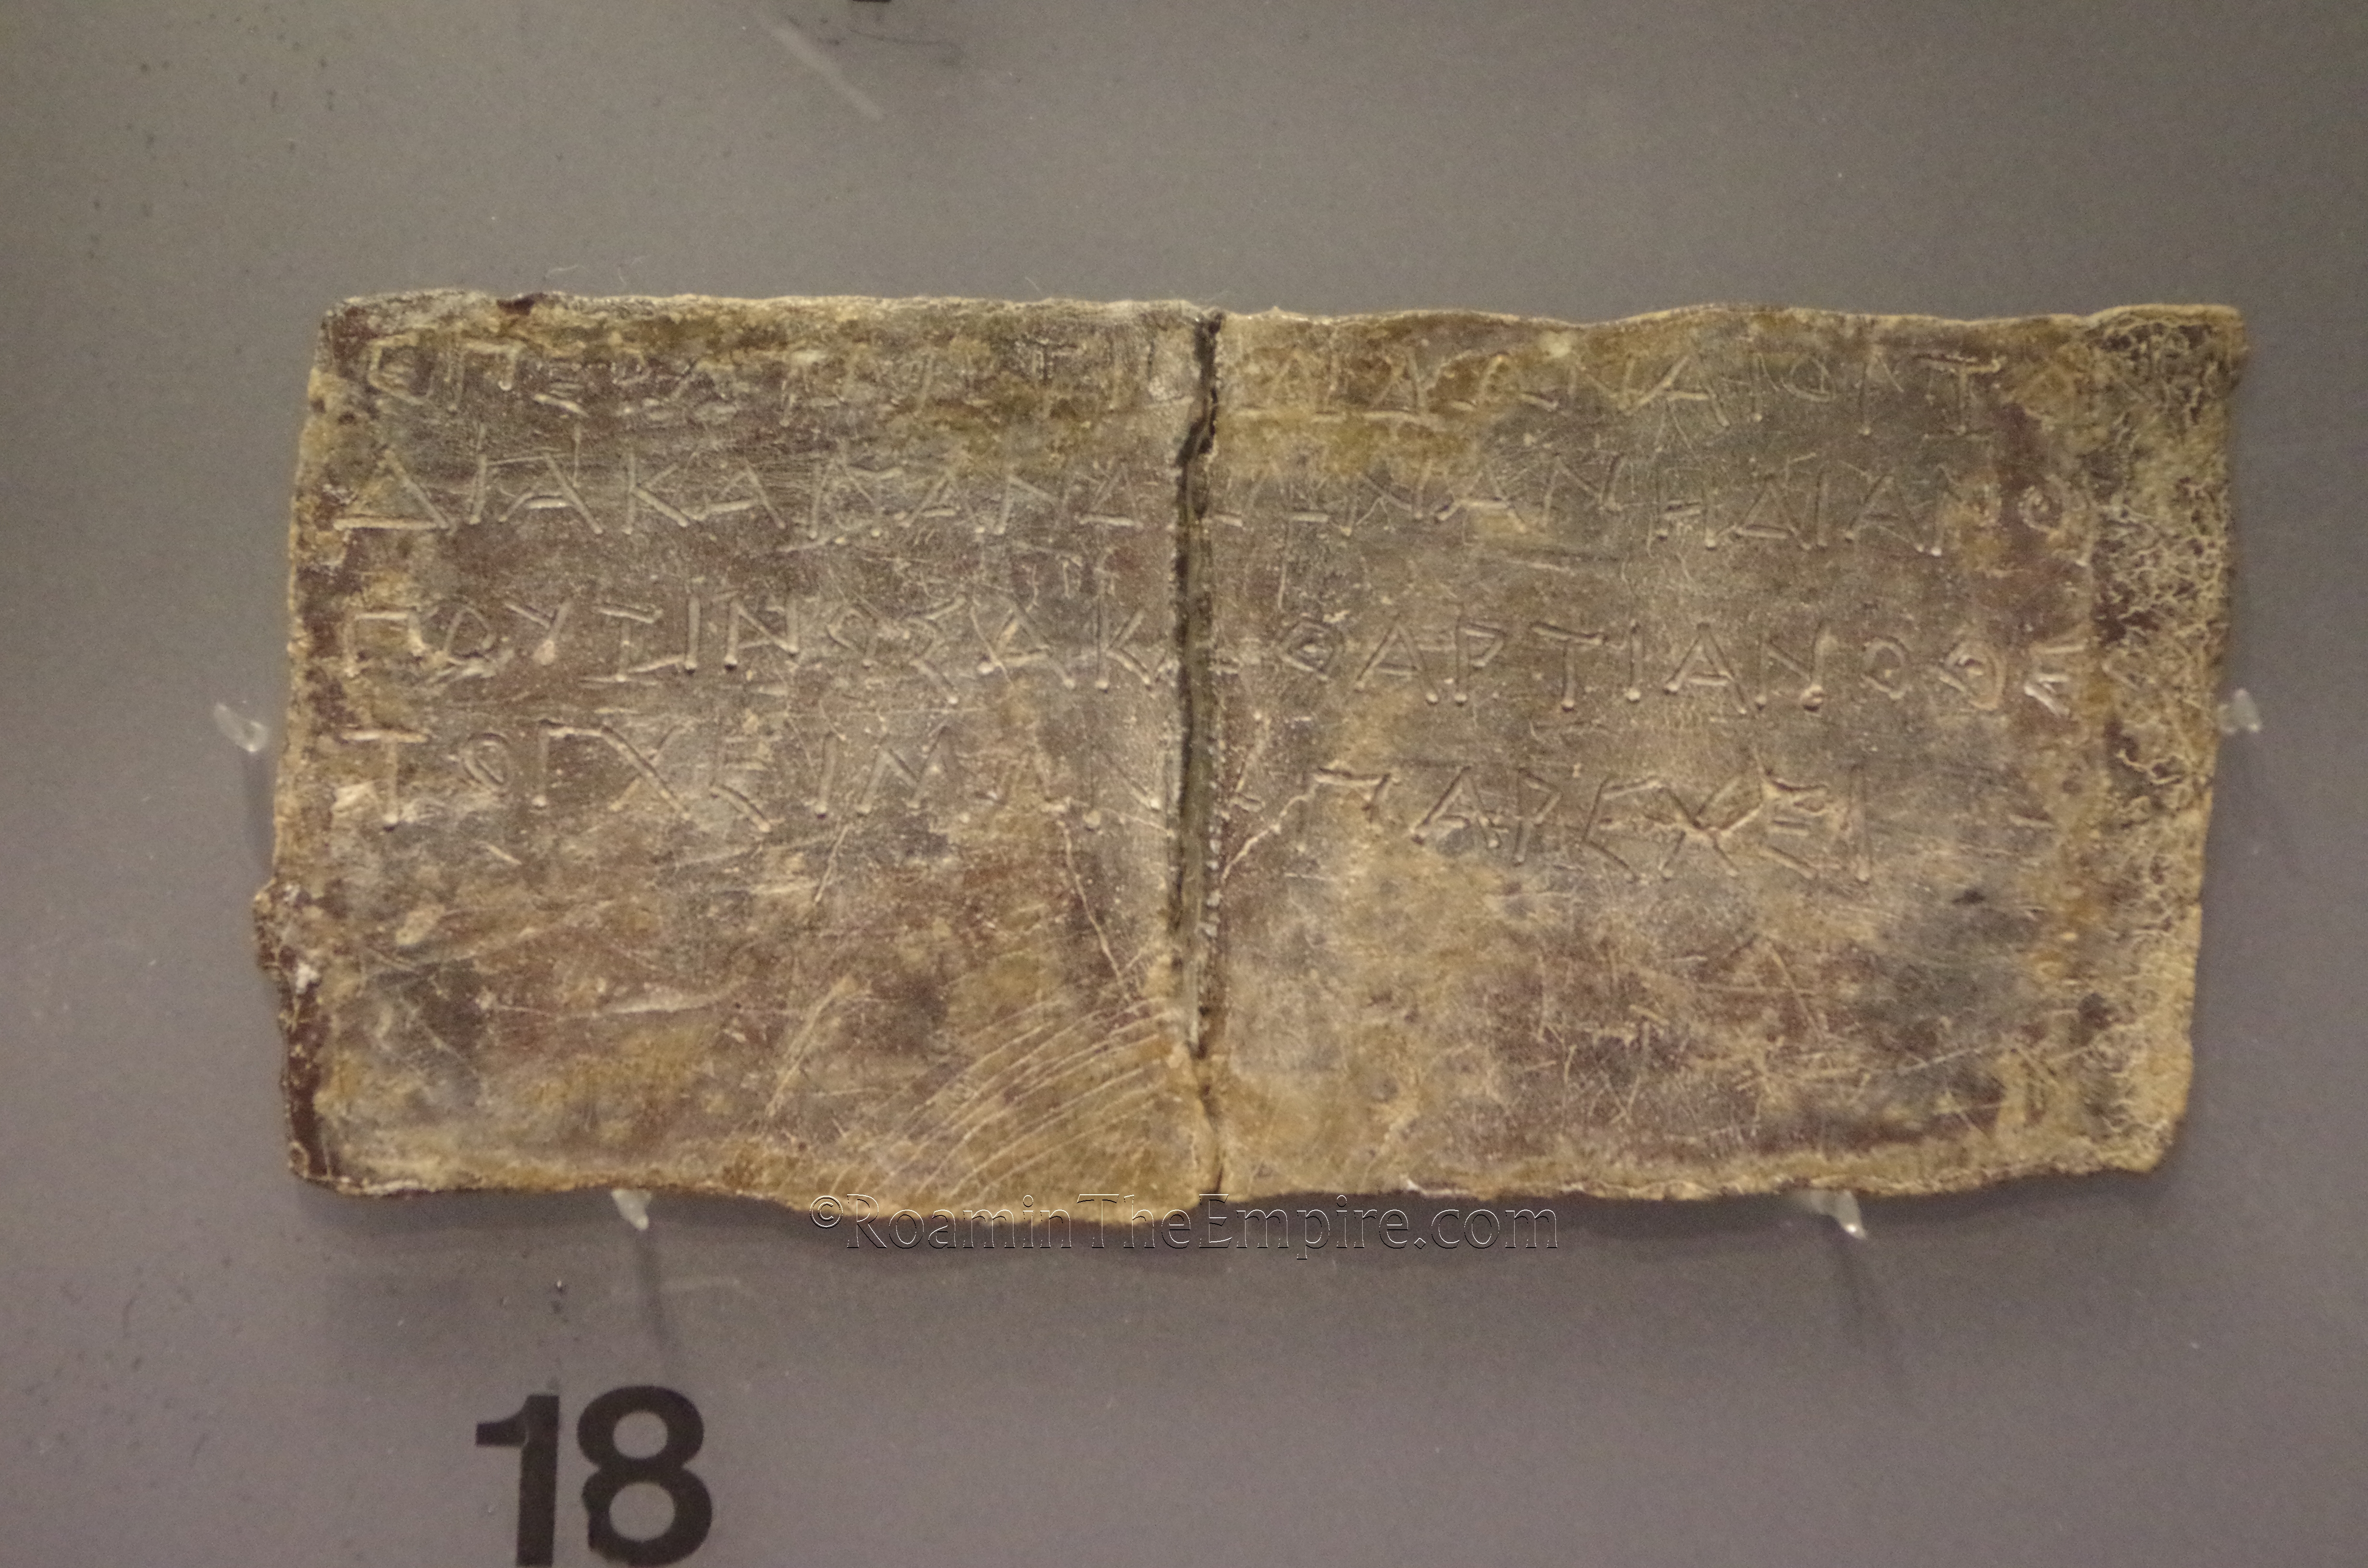 Oracular tablet from Dodona dating to the 3rd to 4th century BCE. On it, the inhabitants of Dodona ask Zeus and Dione if the harsh winter is the result of someone's transgression against the gods. Archaeological Museum of Ioannina.